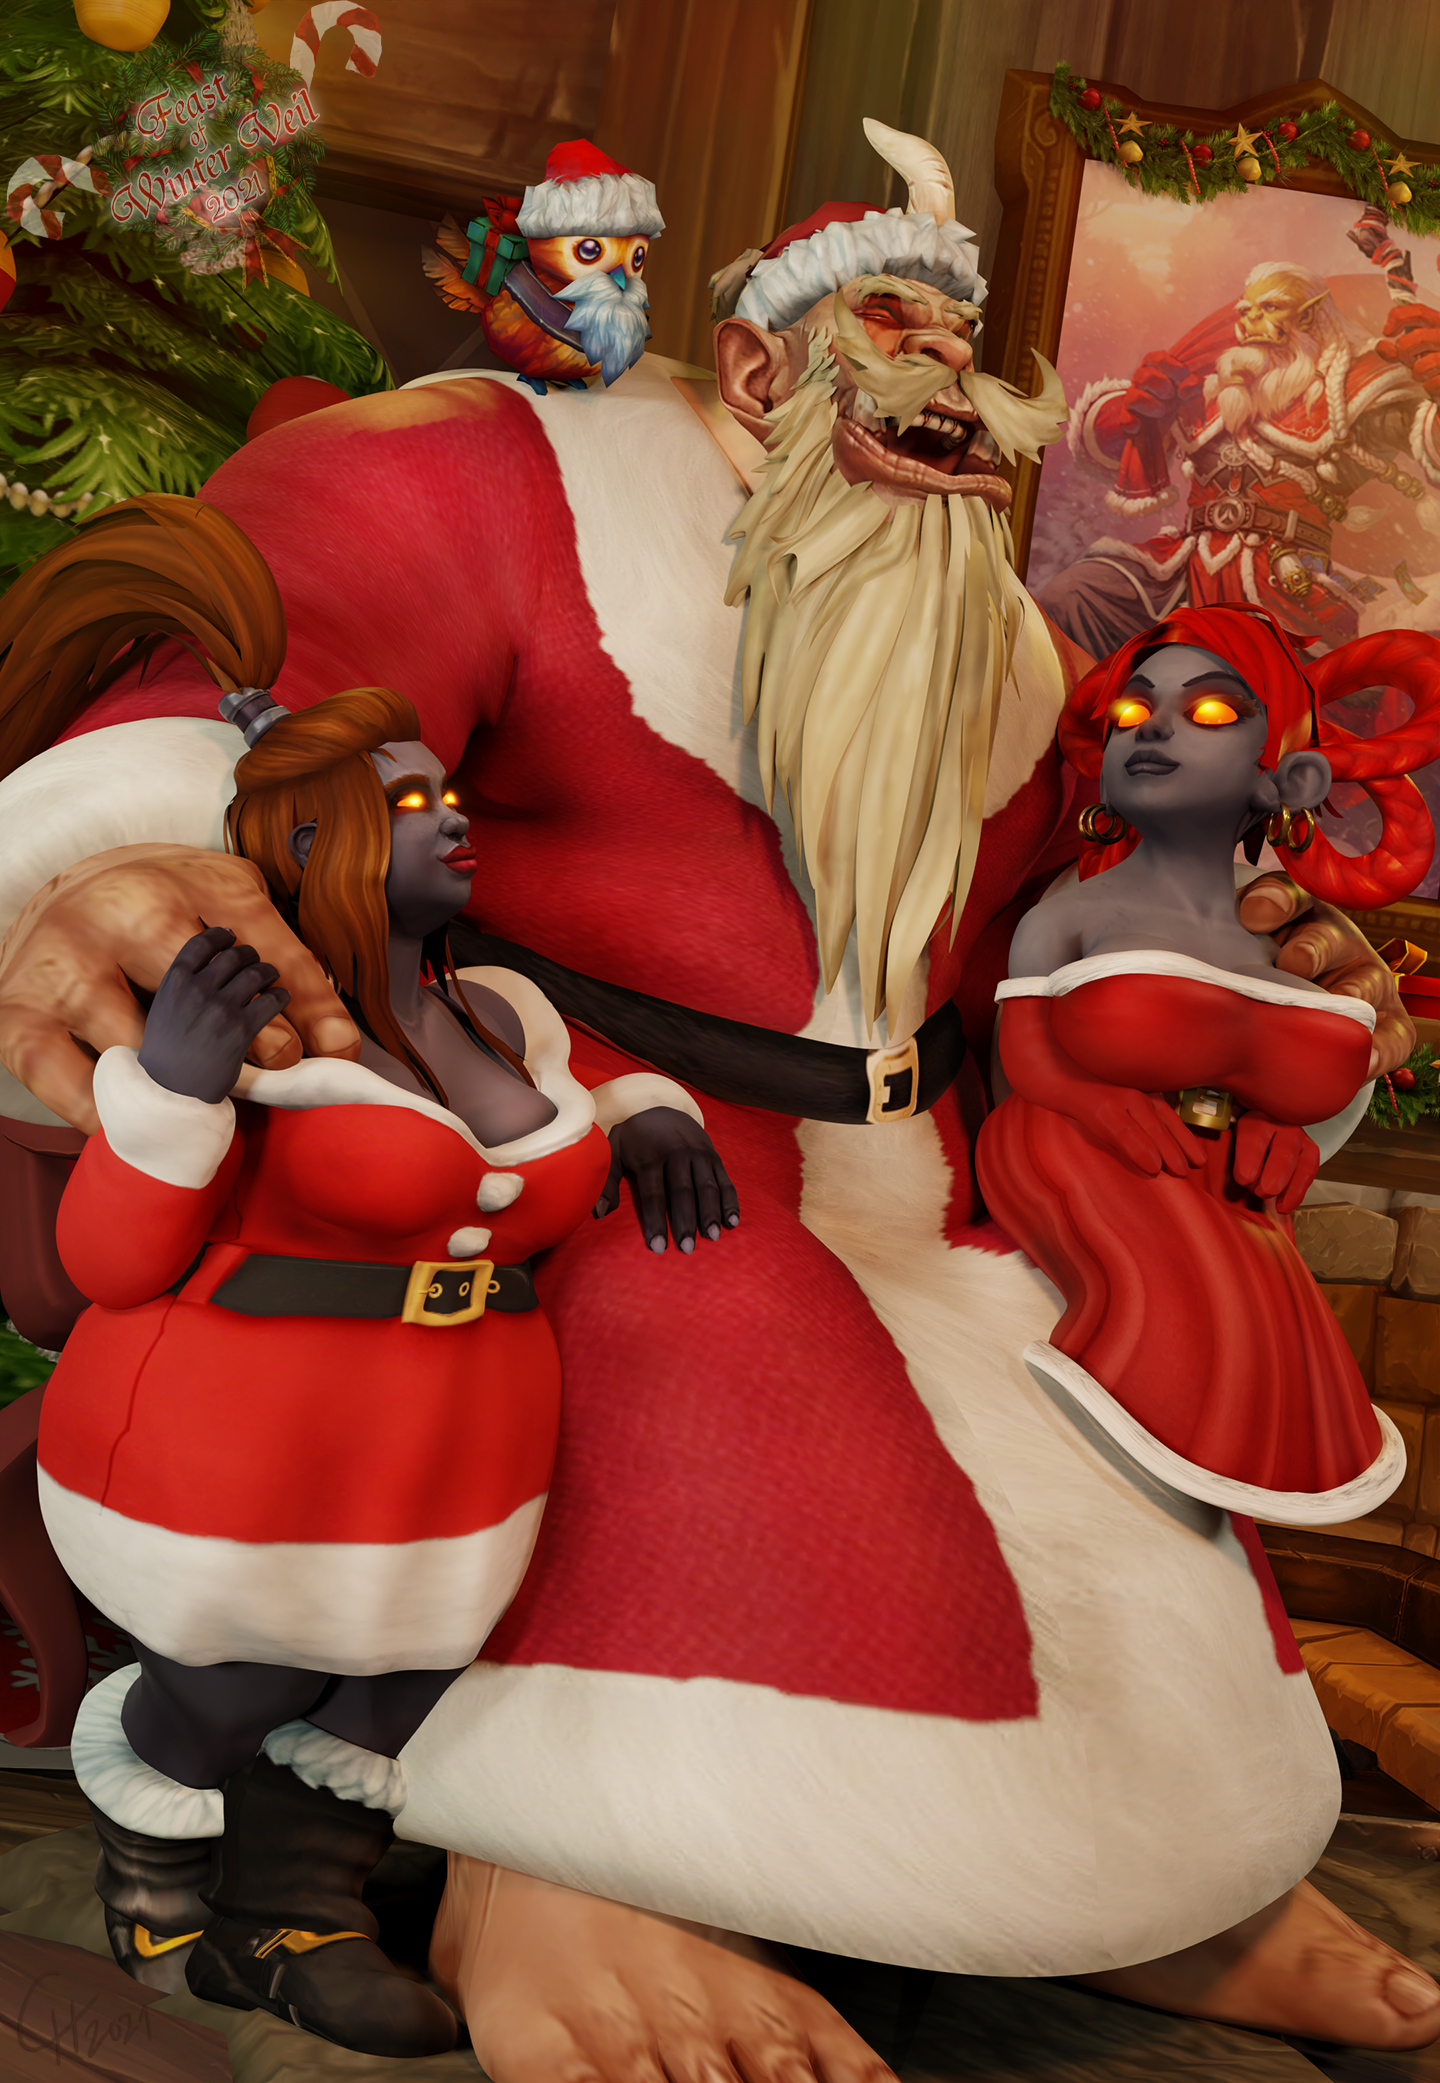 Winter Veil 2021: Greeting Strong-Dad Frost
Strong-Dad Frost, the jolly Winter Veil figure
of Draenor, is currently visiting the good boys and
girls of Azeroth. While having a 'Meet-and-Greet'
at a tavern, two Dark Iron girls finally have their
festive date with the jolly giant of the merrymaking.
[b][url=http://bakaras.com/murlocish/albums/userpics/10001/8/WinterVeil2021-01XL.png]==XL-Size Edit==[/url]
Keywords: OC;dwarf;dark iron dwarf;dark iron gnome;ogre;SFW